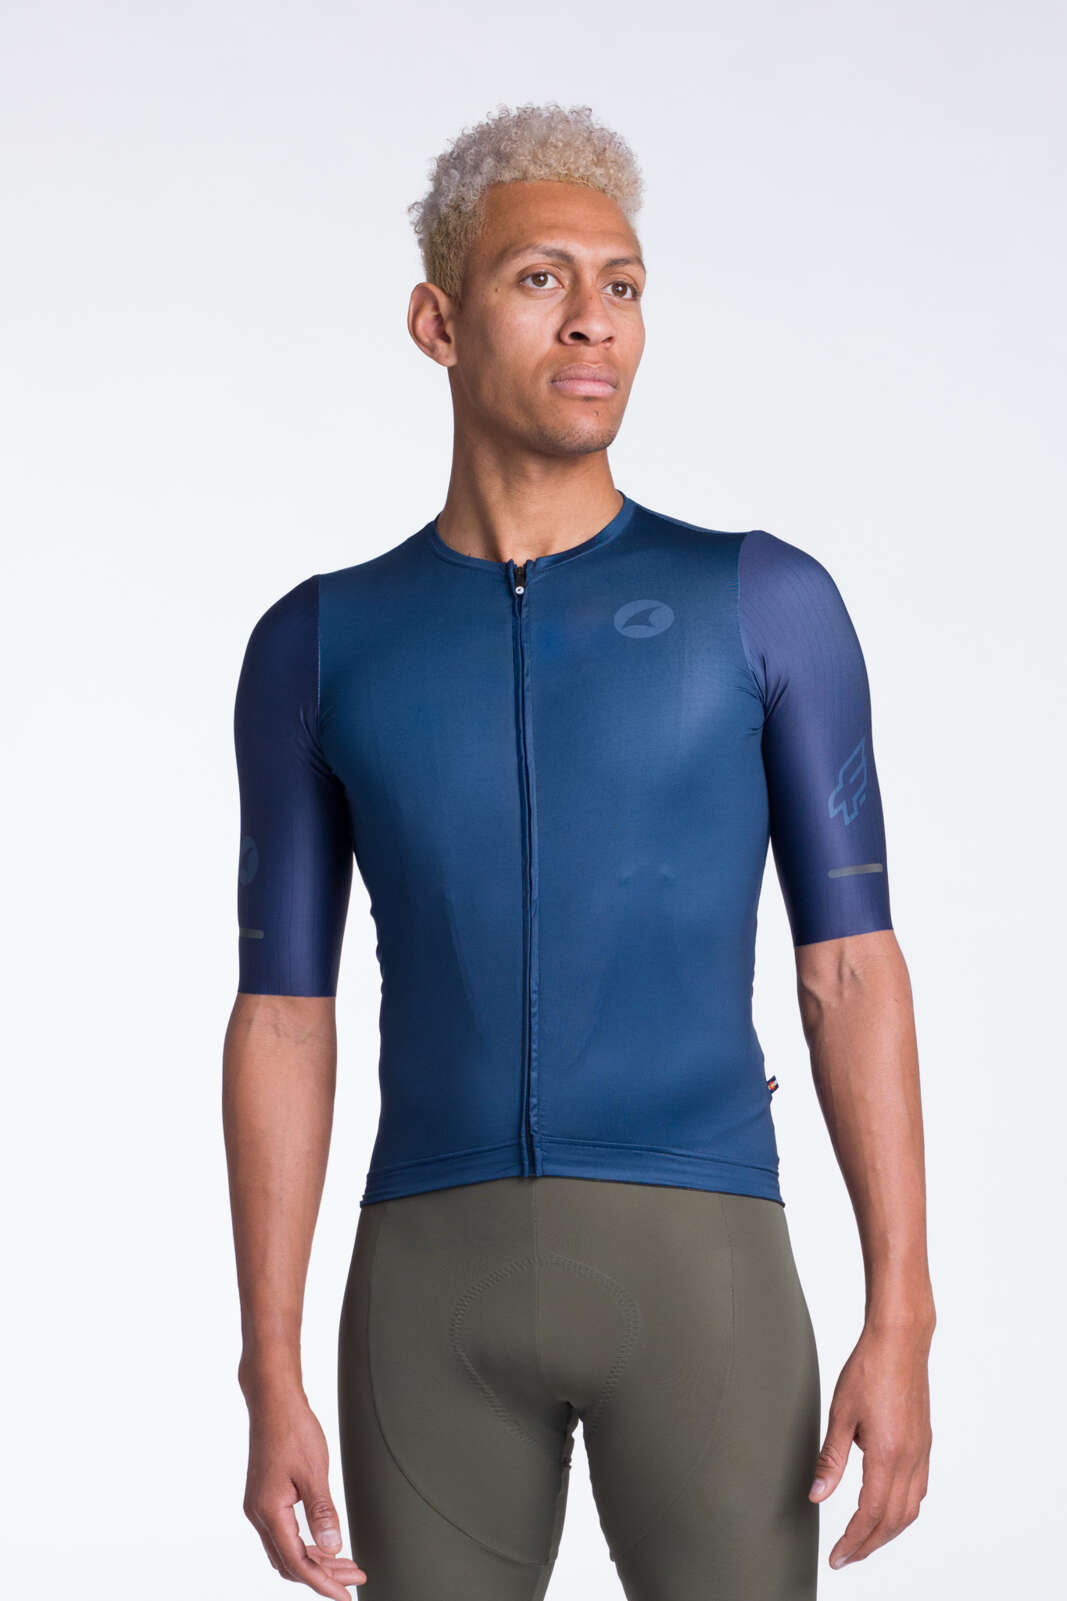 Men's Navy Blue Aero Cycling Jersey - Flyte Front View